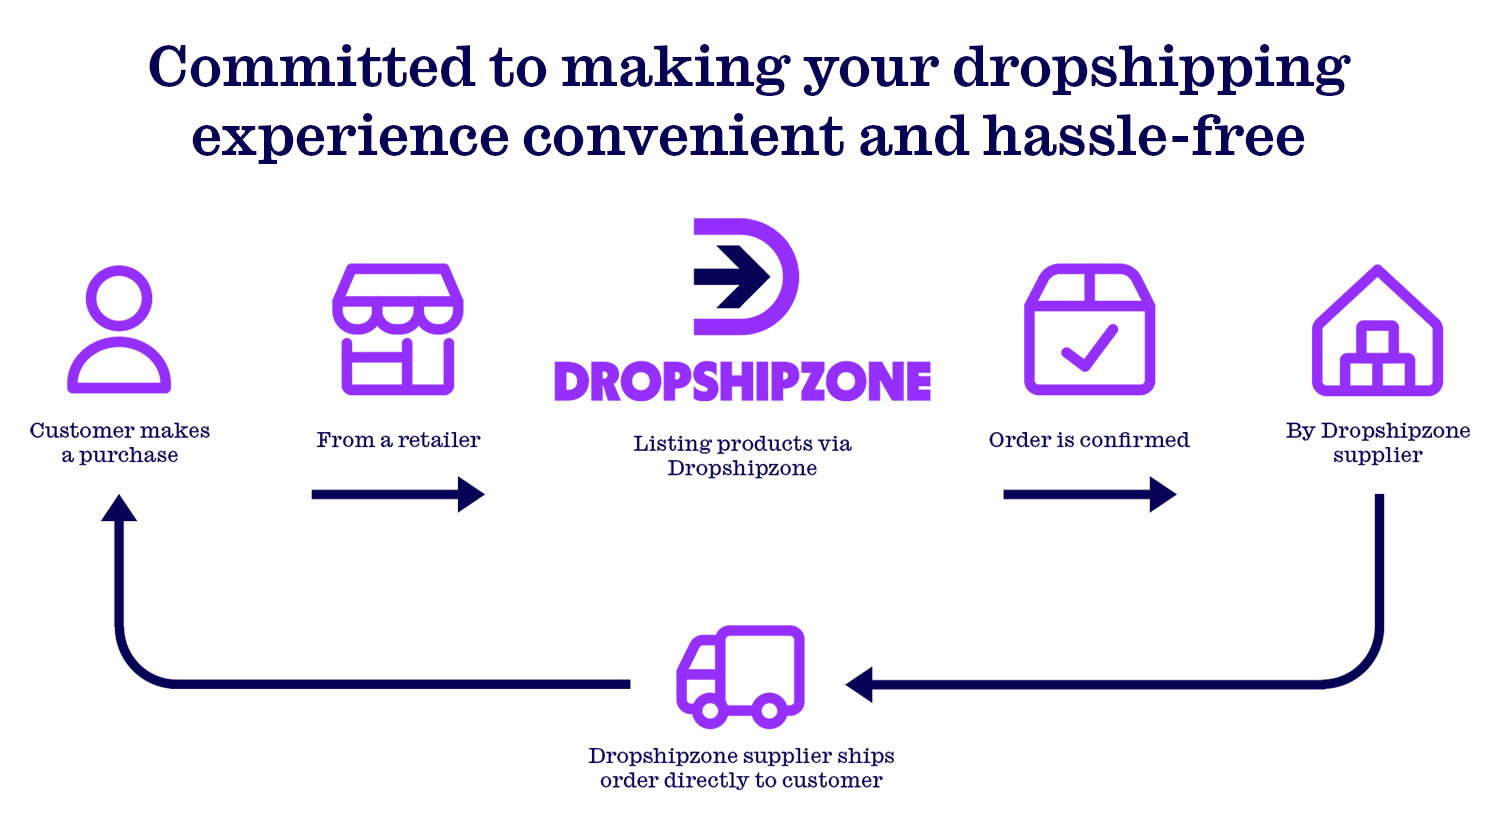 Sign up to Dropshipzone today and make your dropshipping experience hassle-free.